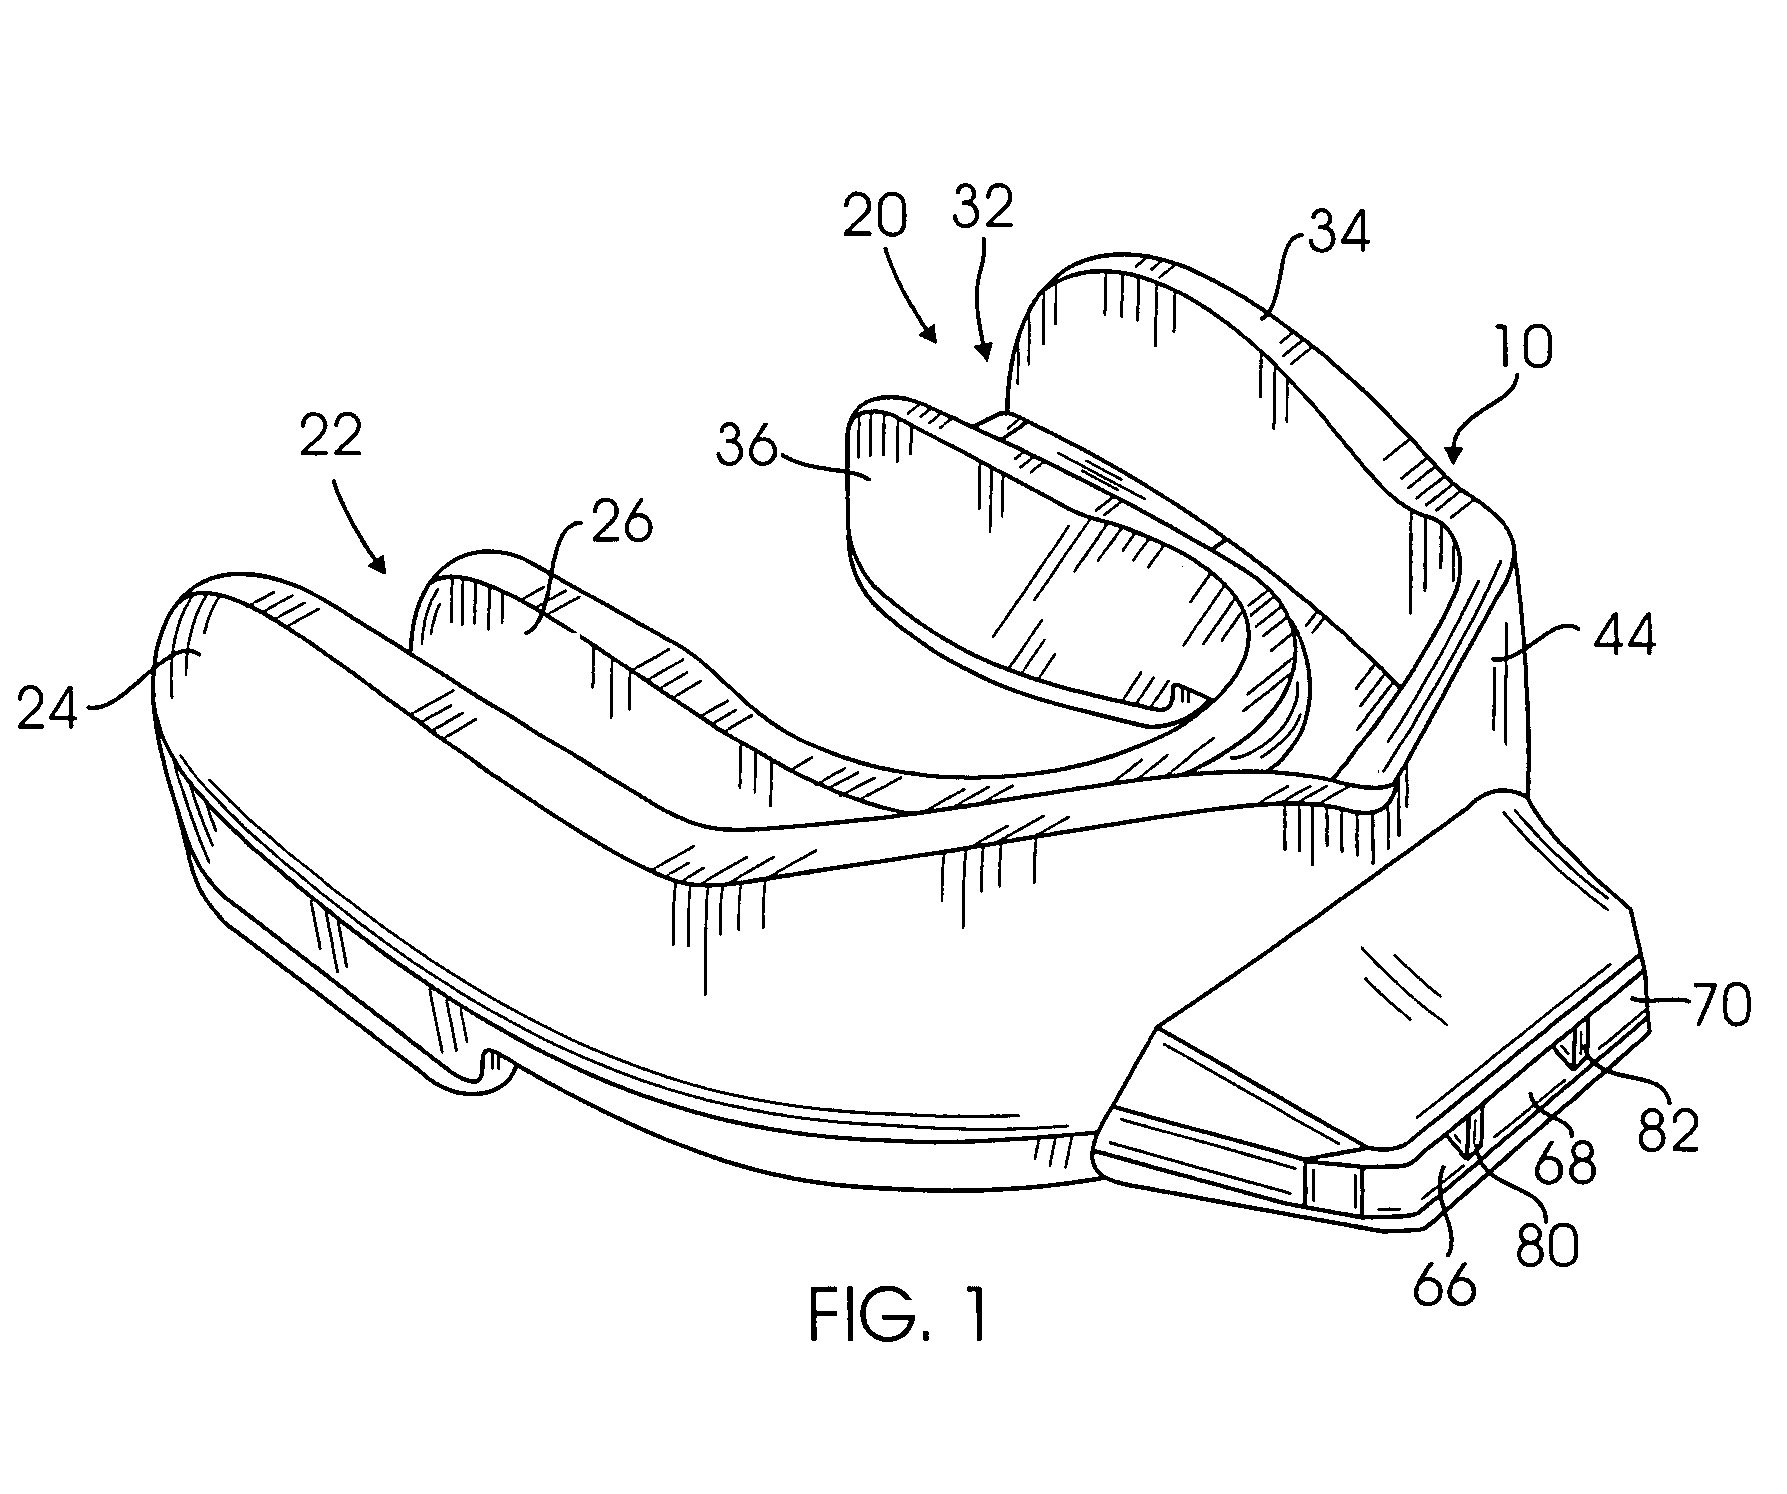 Mouthguard having breathing holes incorporated therein